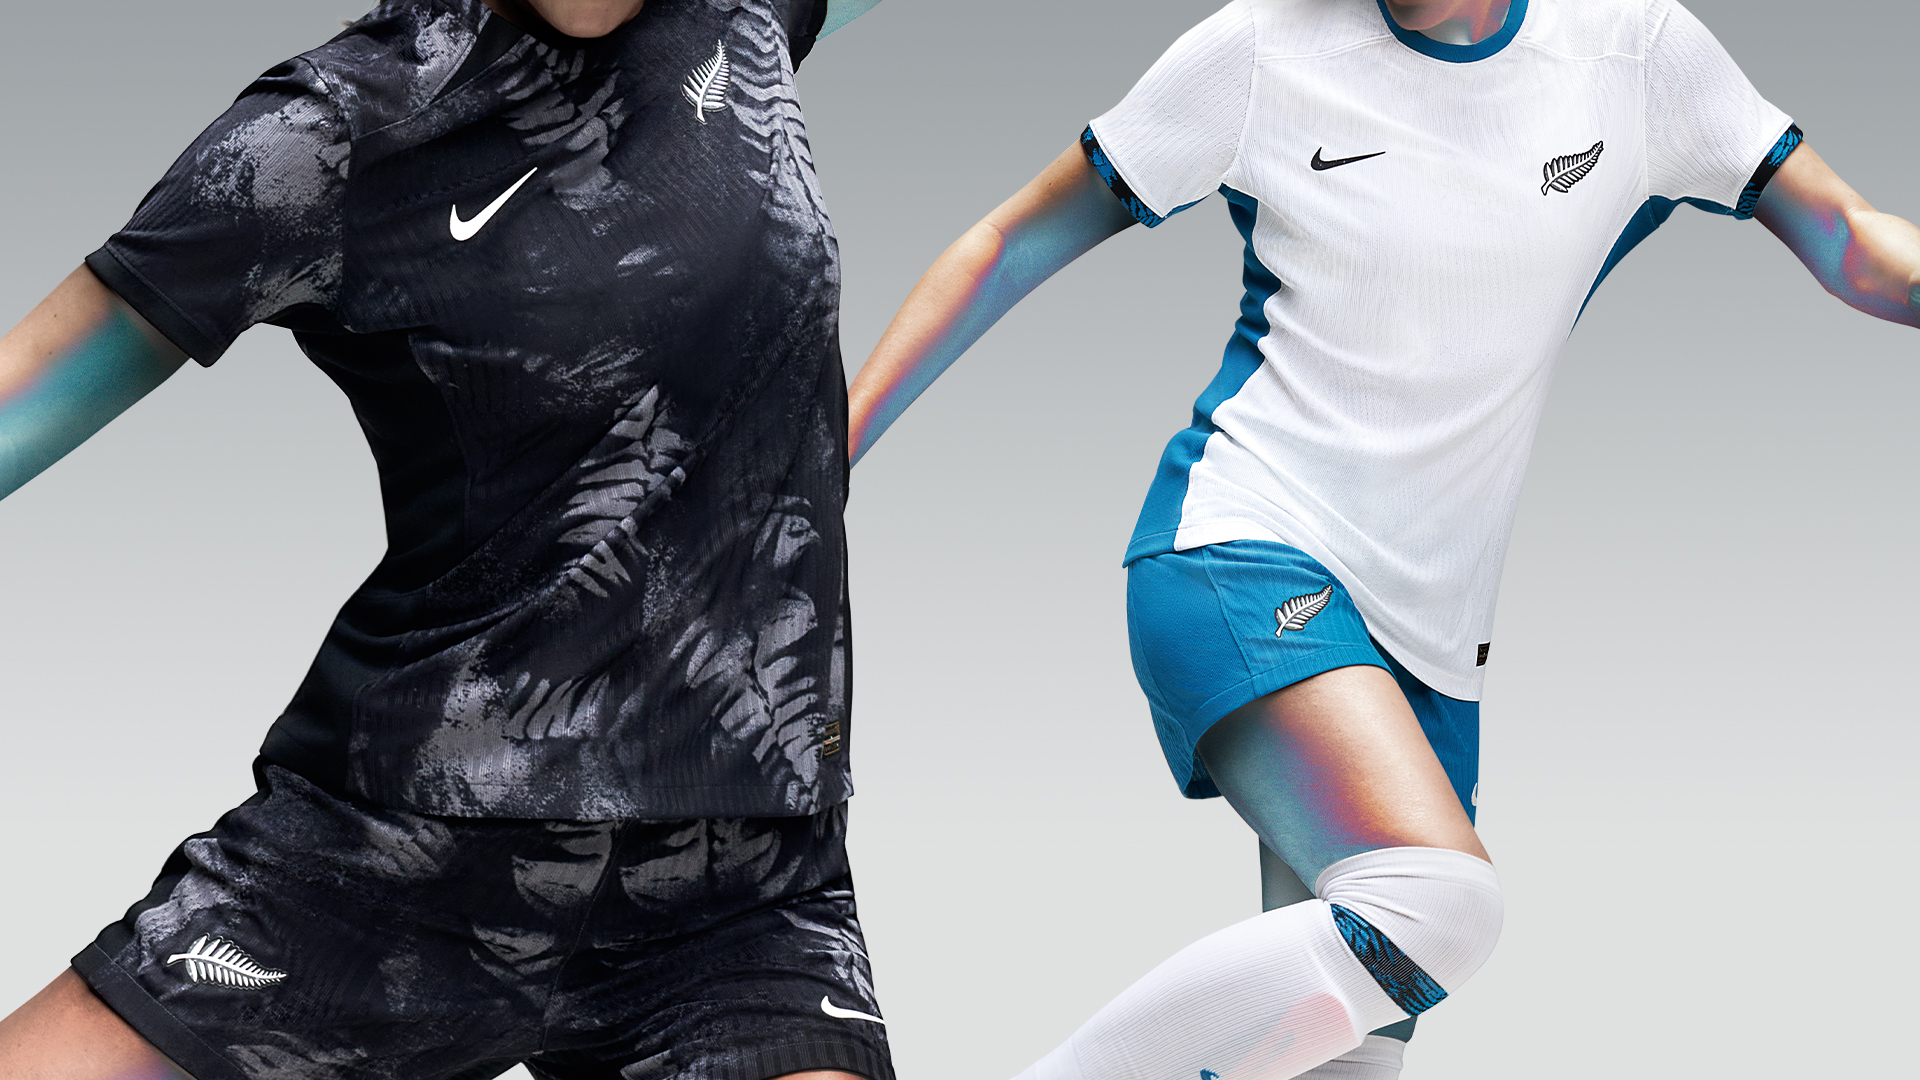 Women's World Cup: Women, Sports, and the Power of a Uniform